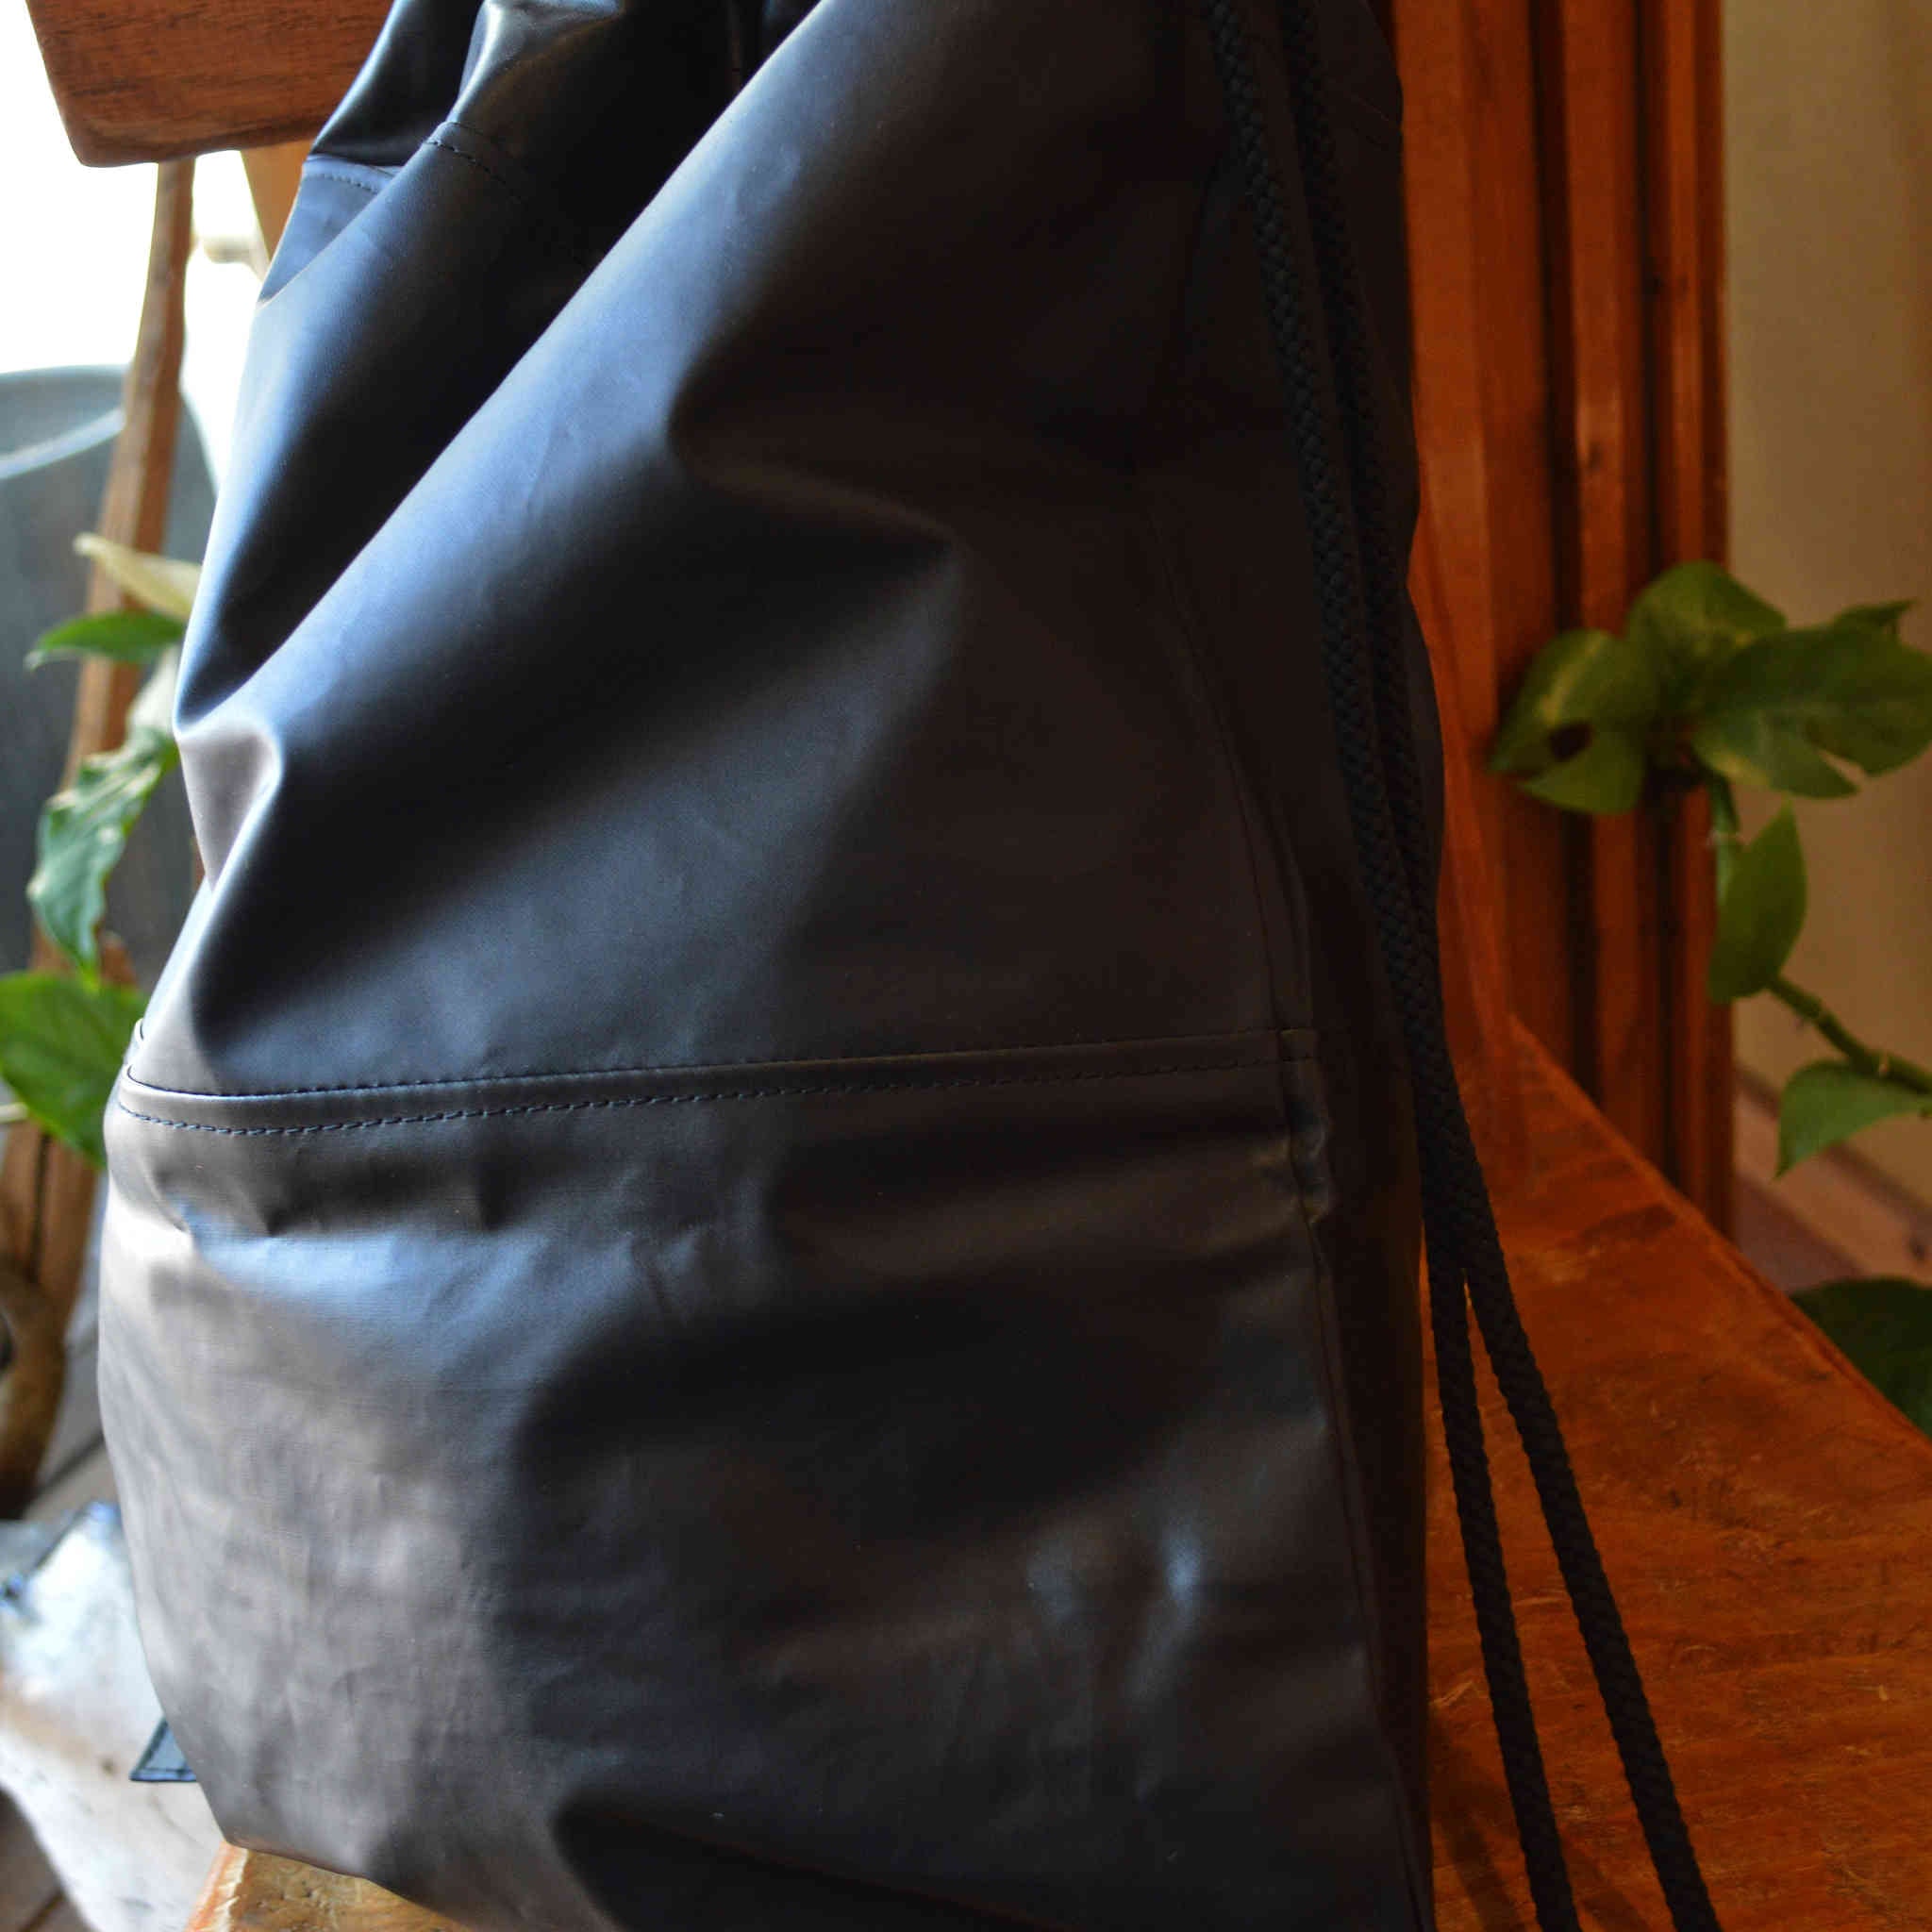 BIG P.PRODUCTS ビックピープロダクト / Vintage Military Fabric Rubber Knap Sack 1960’s Sweden Military リメイクラバーナップサック